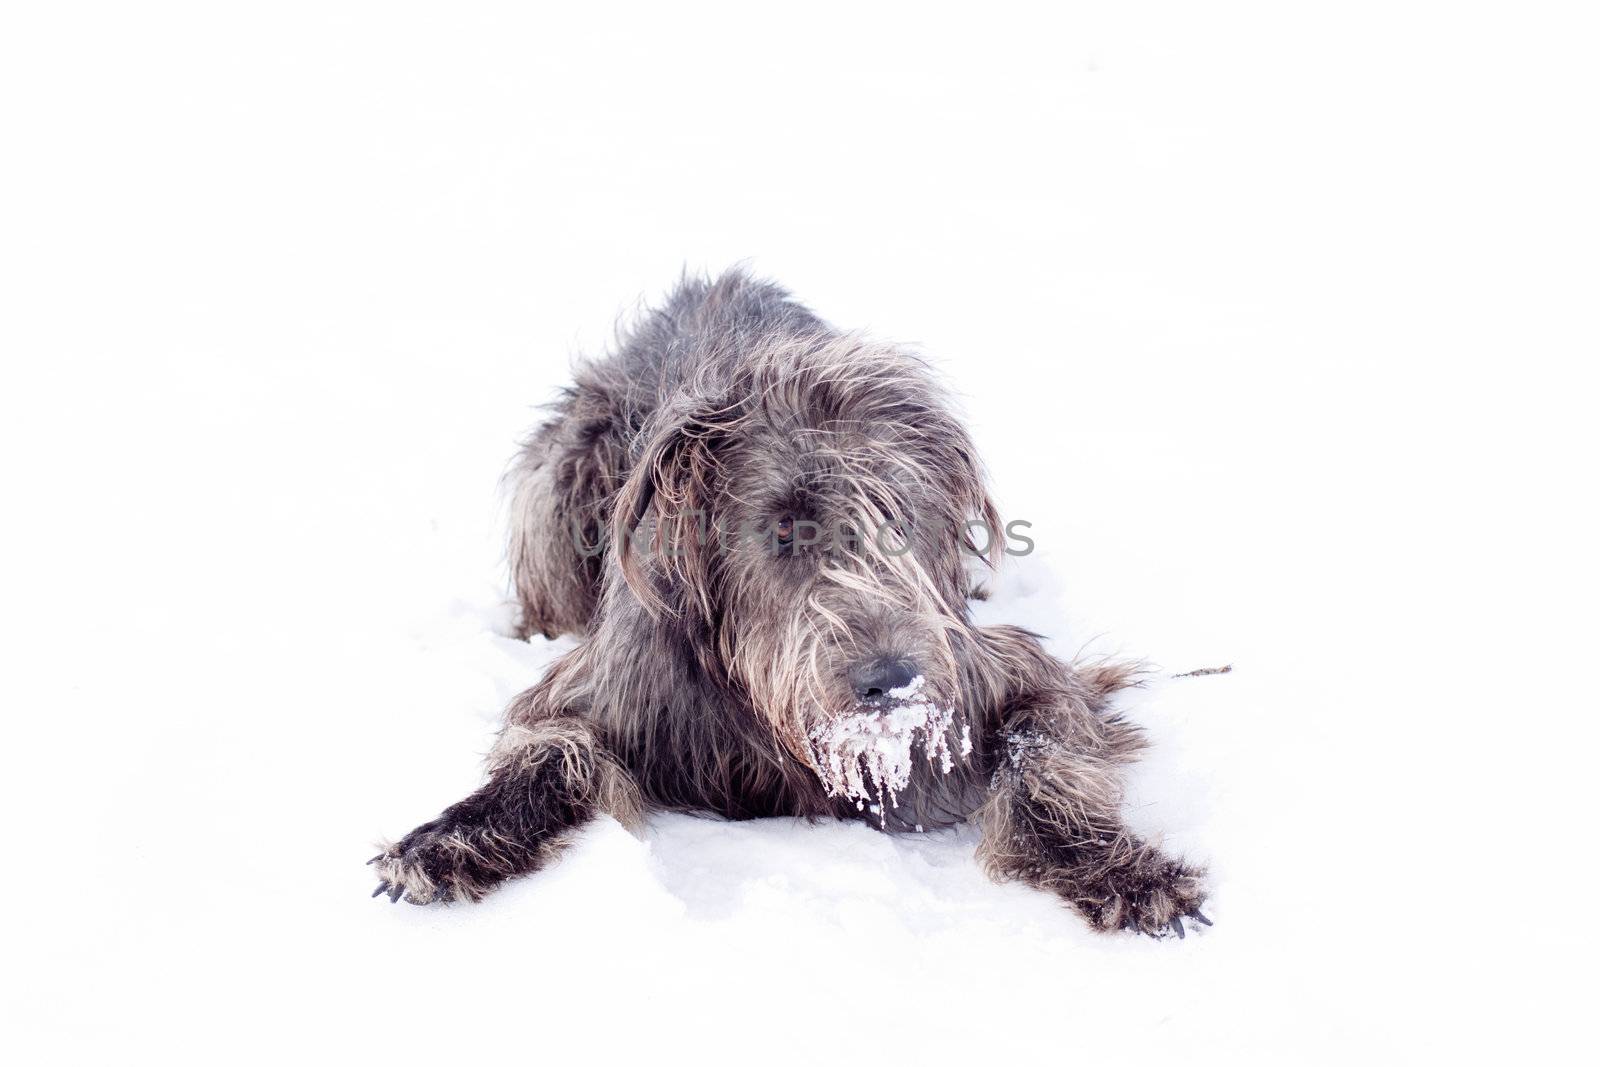 An Irish wolfhound lying on a snow-covered field
